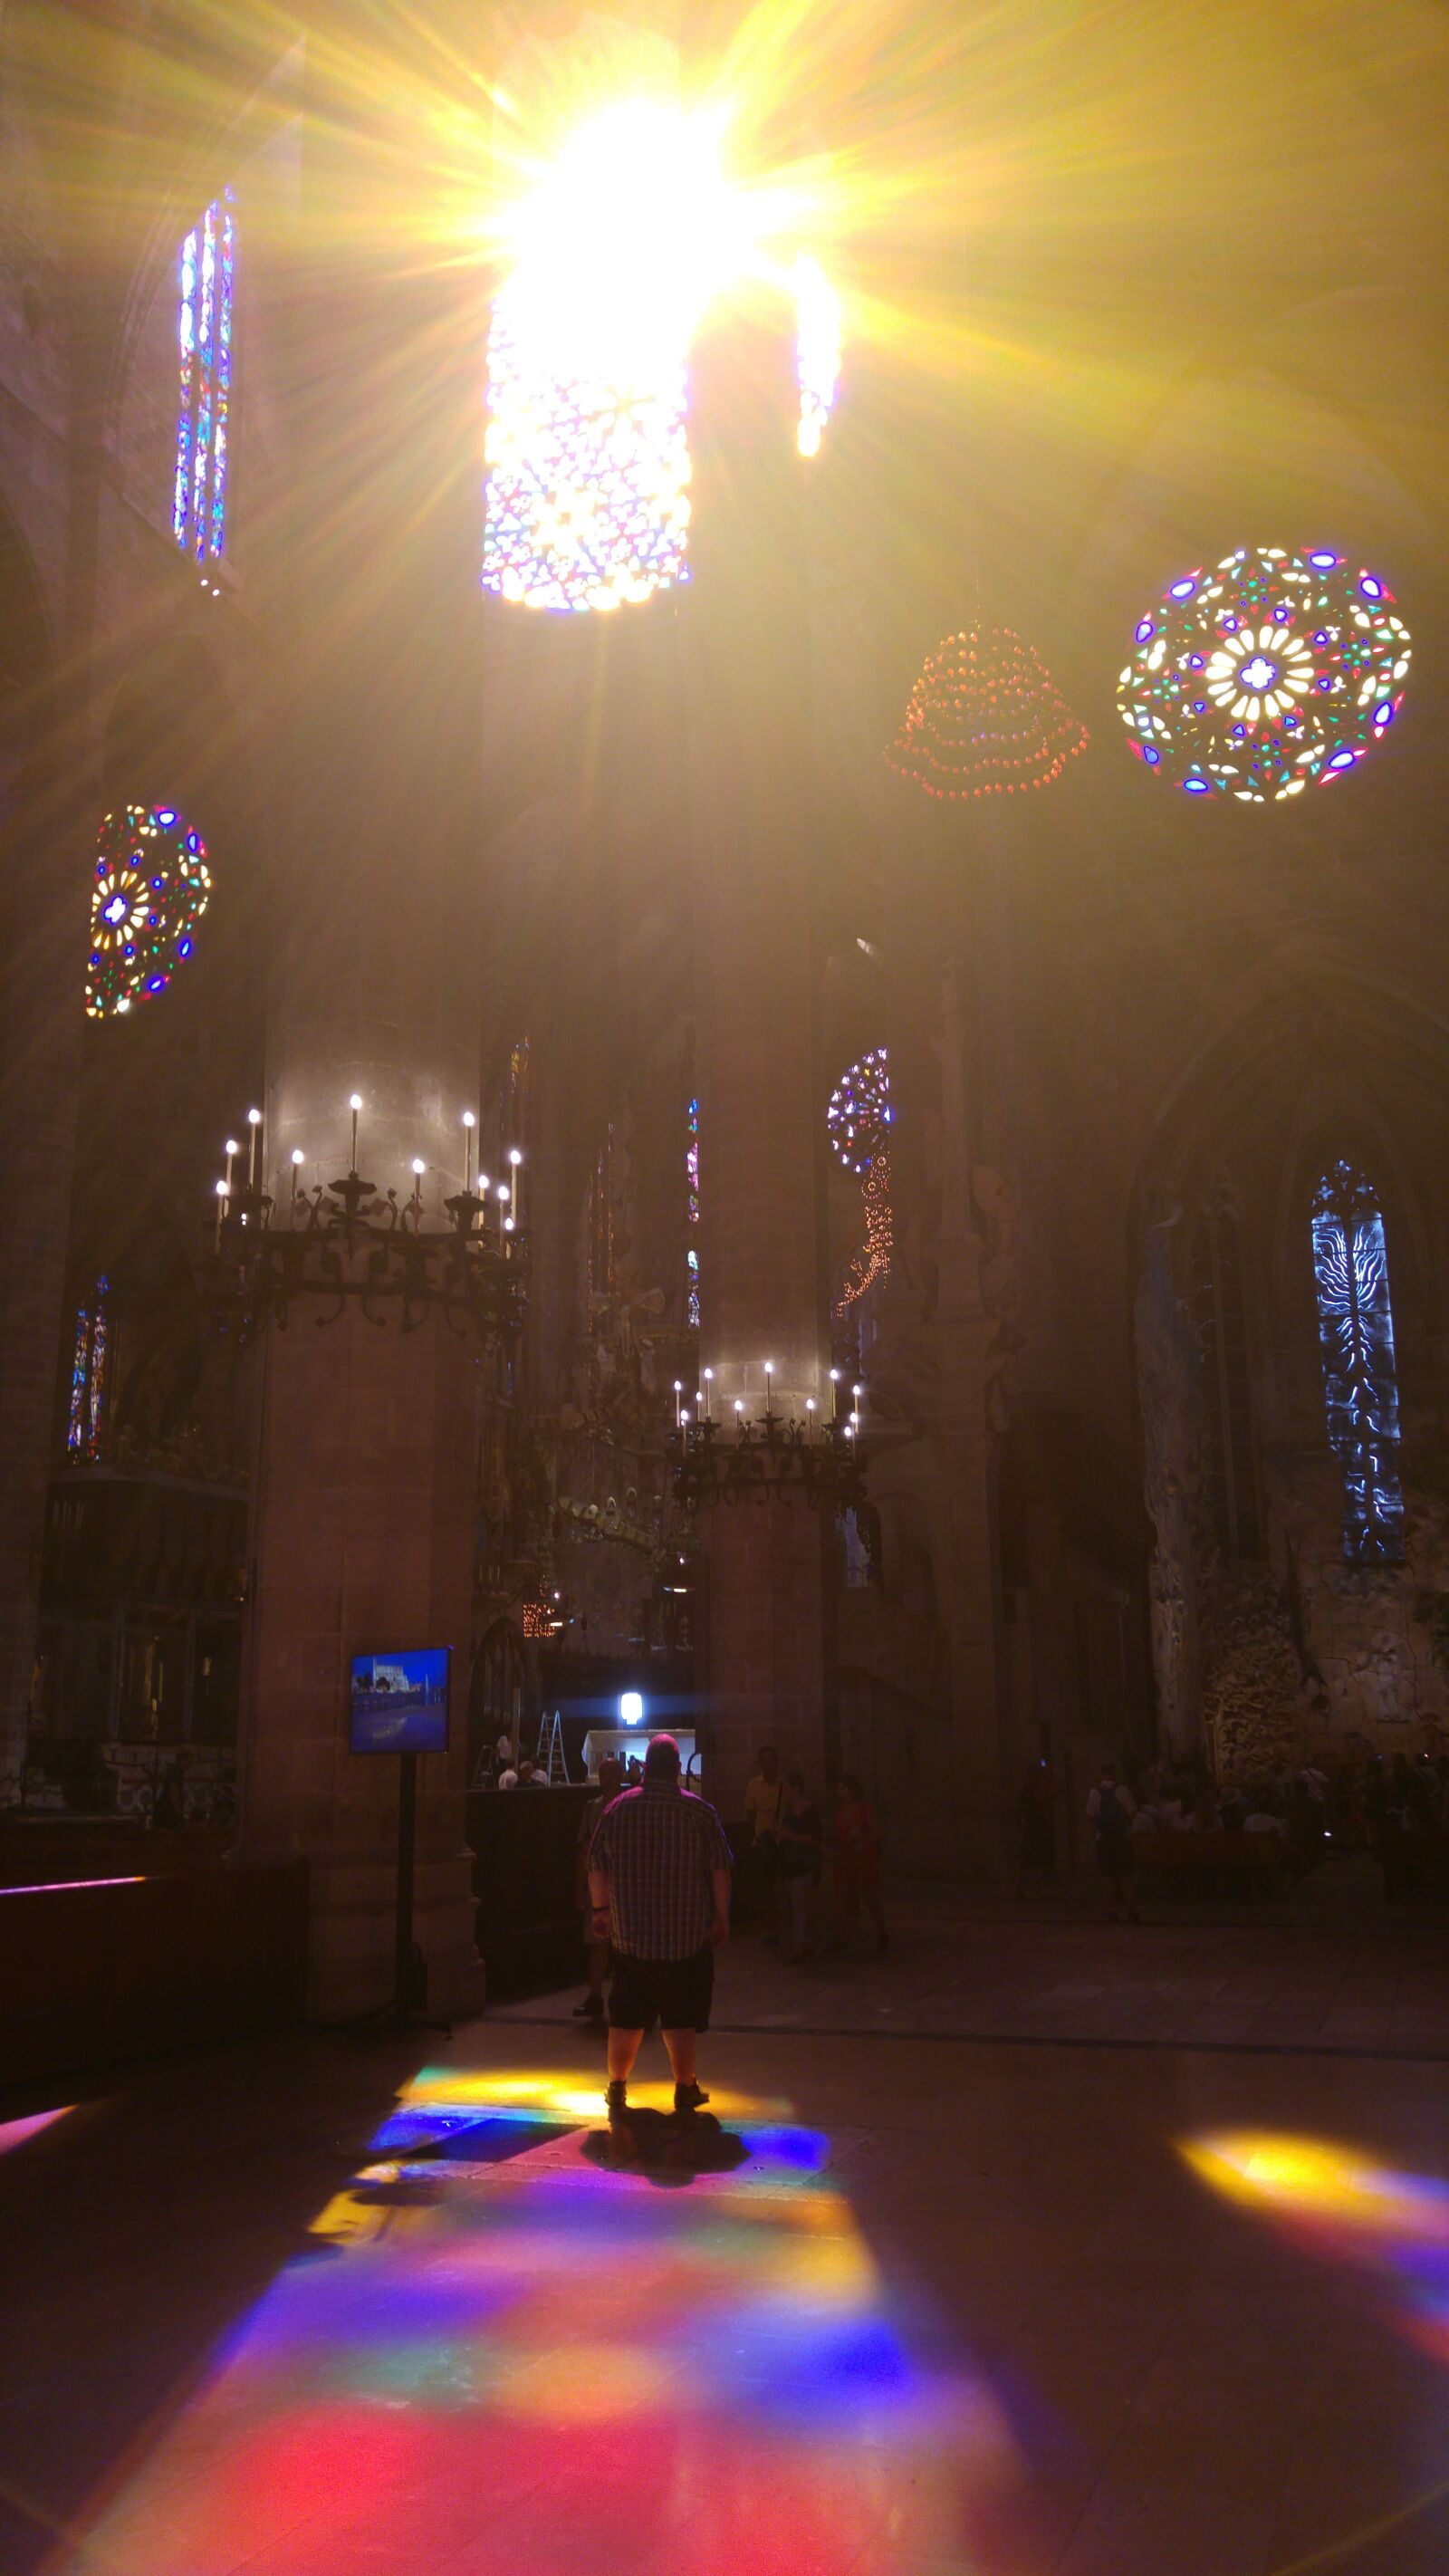 LG G4 sample photo. Cathedral, rosette, light photography